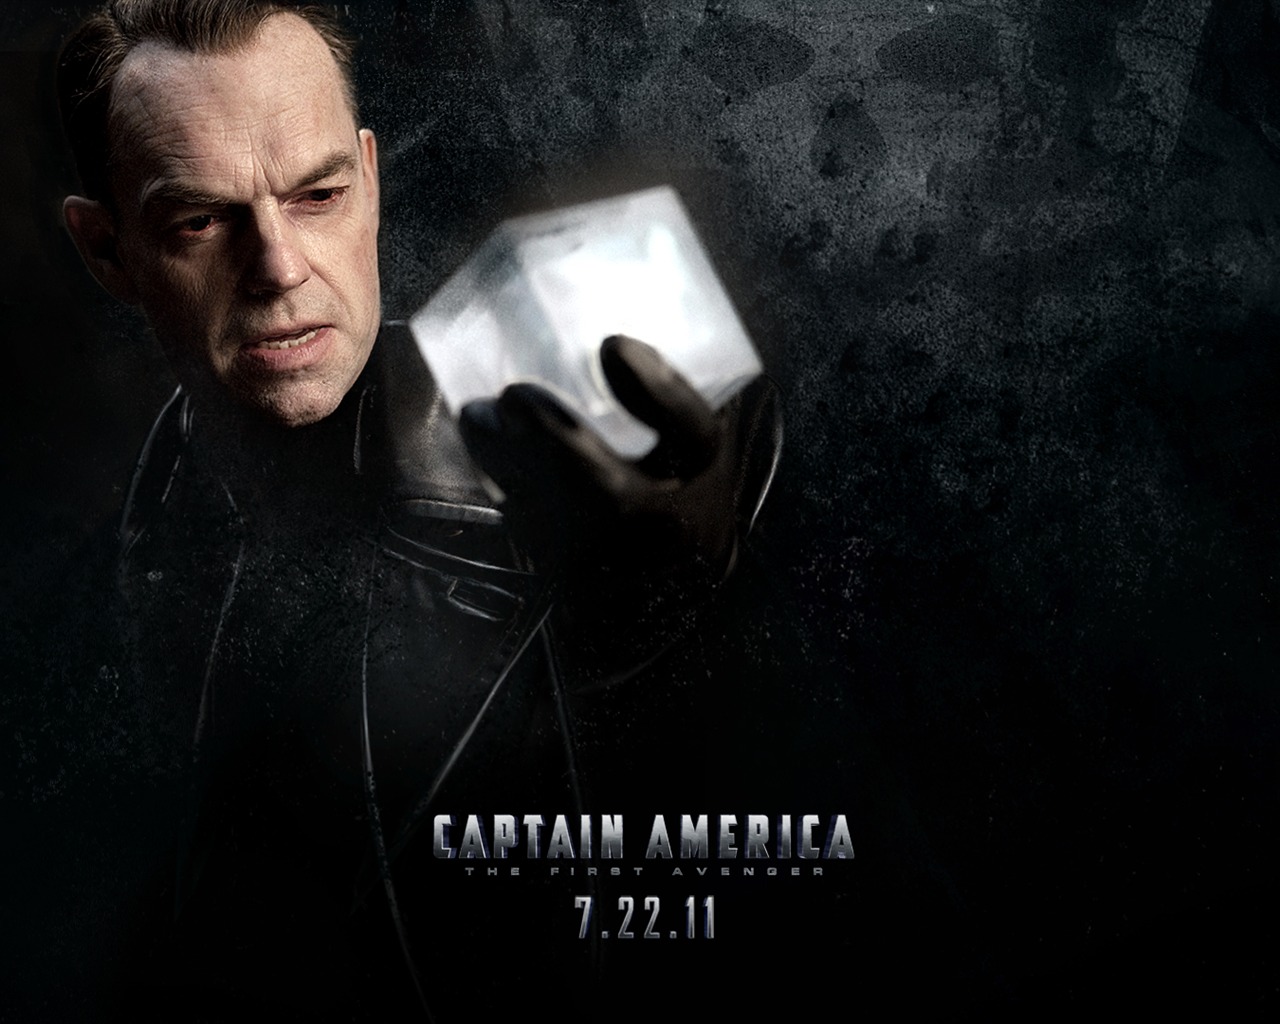 Captain America: The First Avenger wallpapers HD #13 - 1280x1024